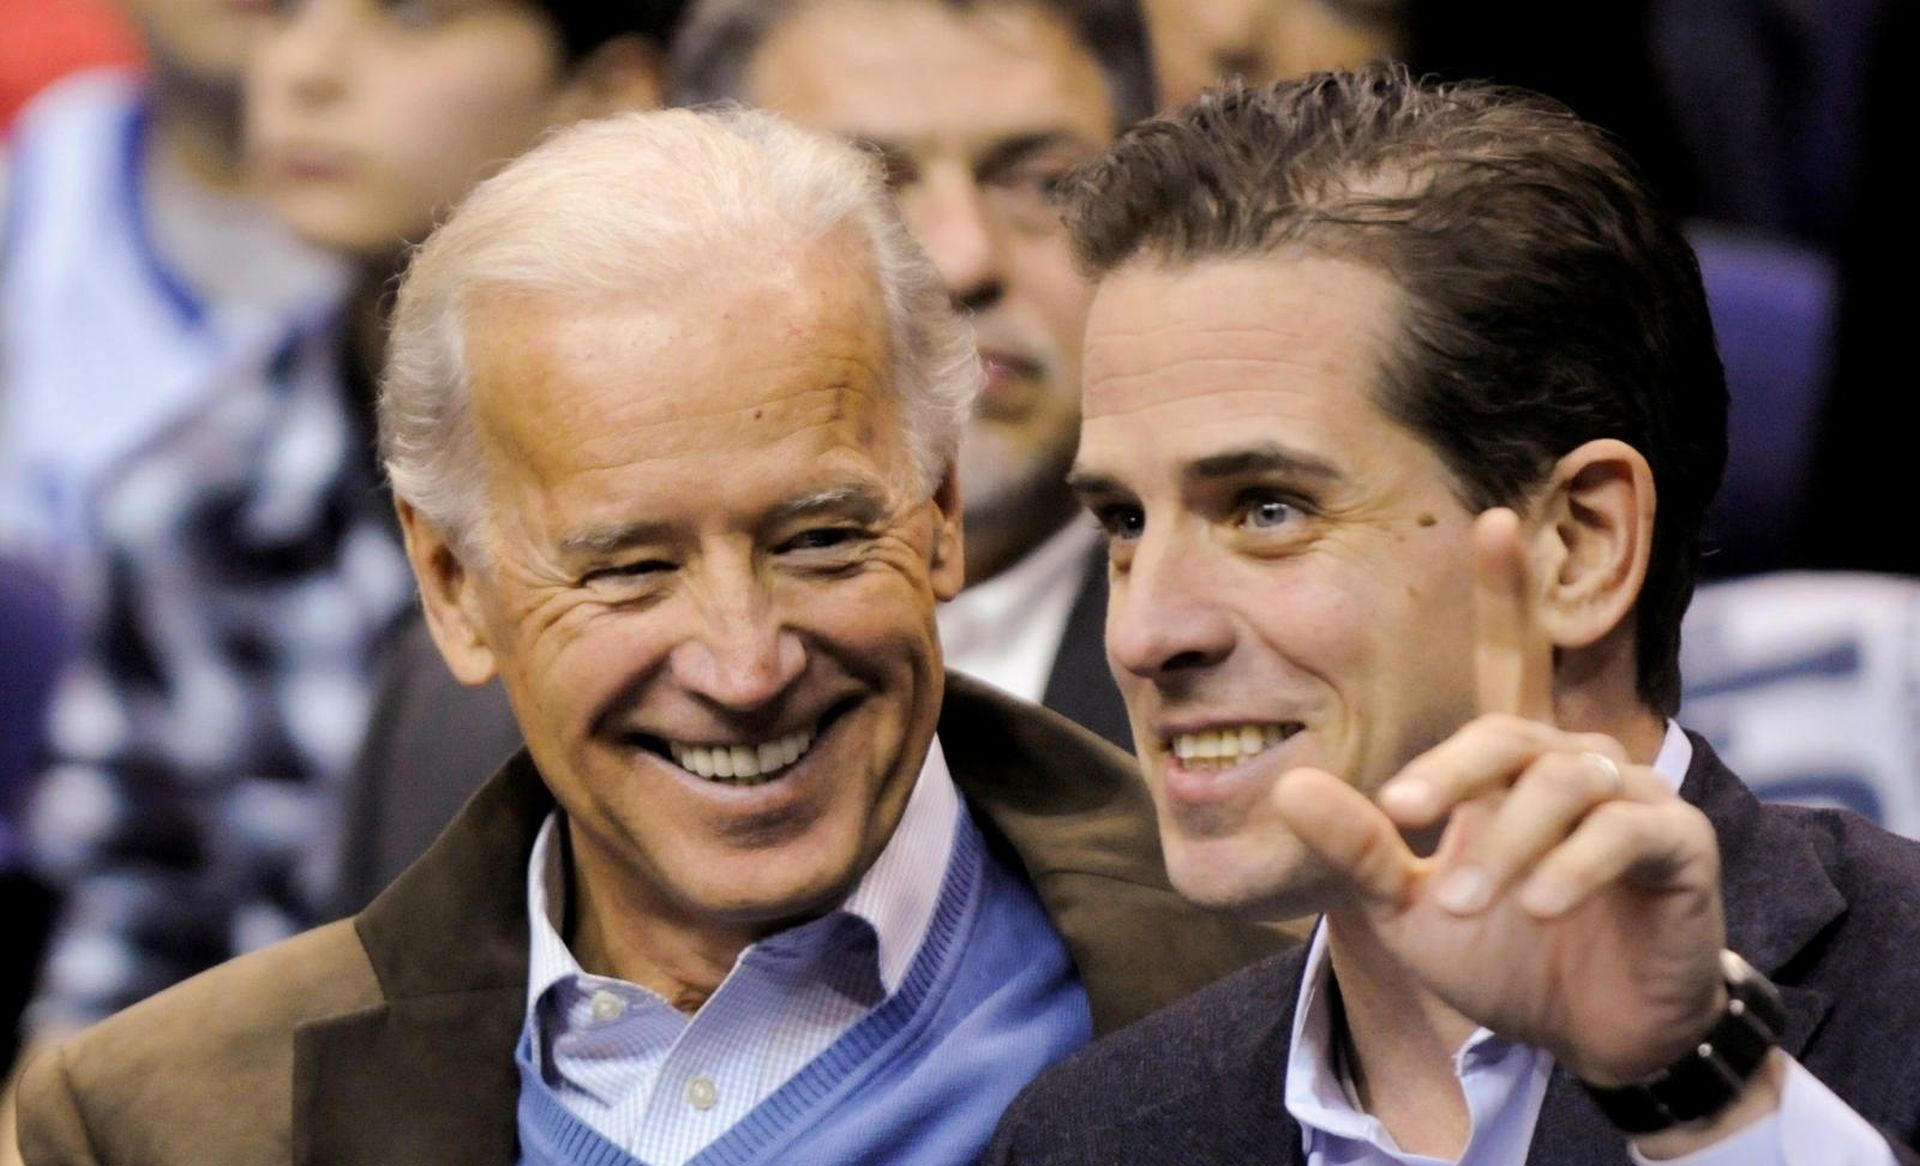 FILE PHOTO: U.S. Vice President Biden and his son Hunter attend an NCAA basketball game between Georgetown University and Duke University in Washington FILE PHOTO: U.S. Vice President Joe Biden and his son Hunter Biden attend an NCAA basketball game between Georgetown University and Duke University in Washington, U.S., January 30, 2010. REUTERS/Jonathan Ernst/File Photo Jonathan Ernst